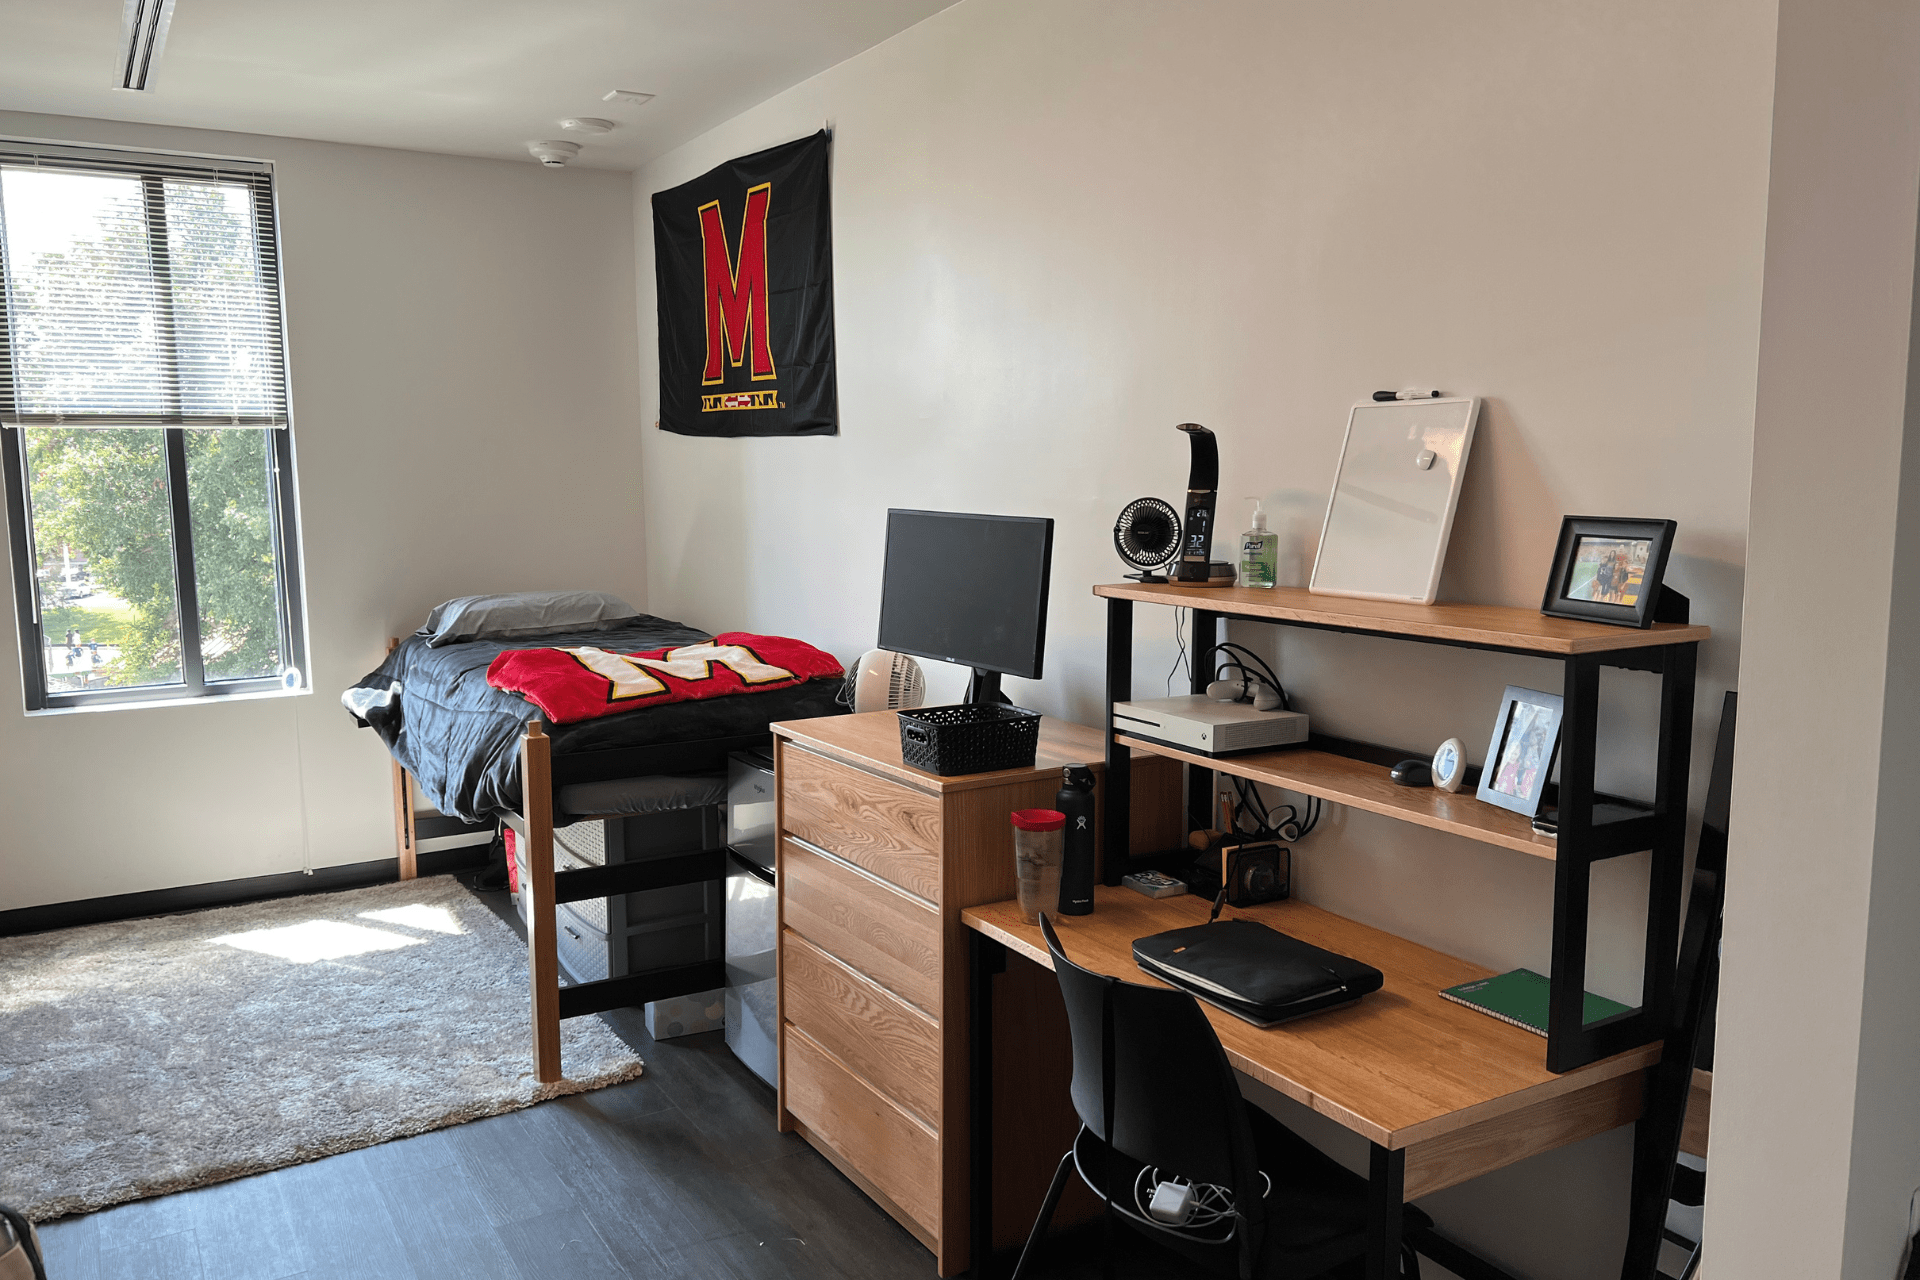 residence hall room decorated with Maryland gear